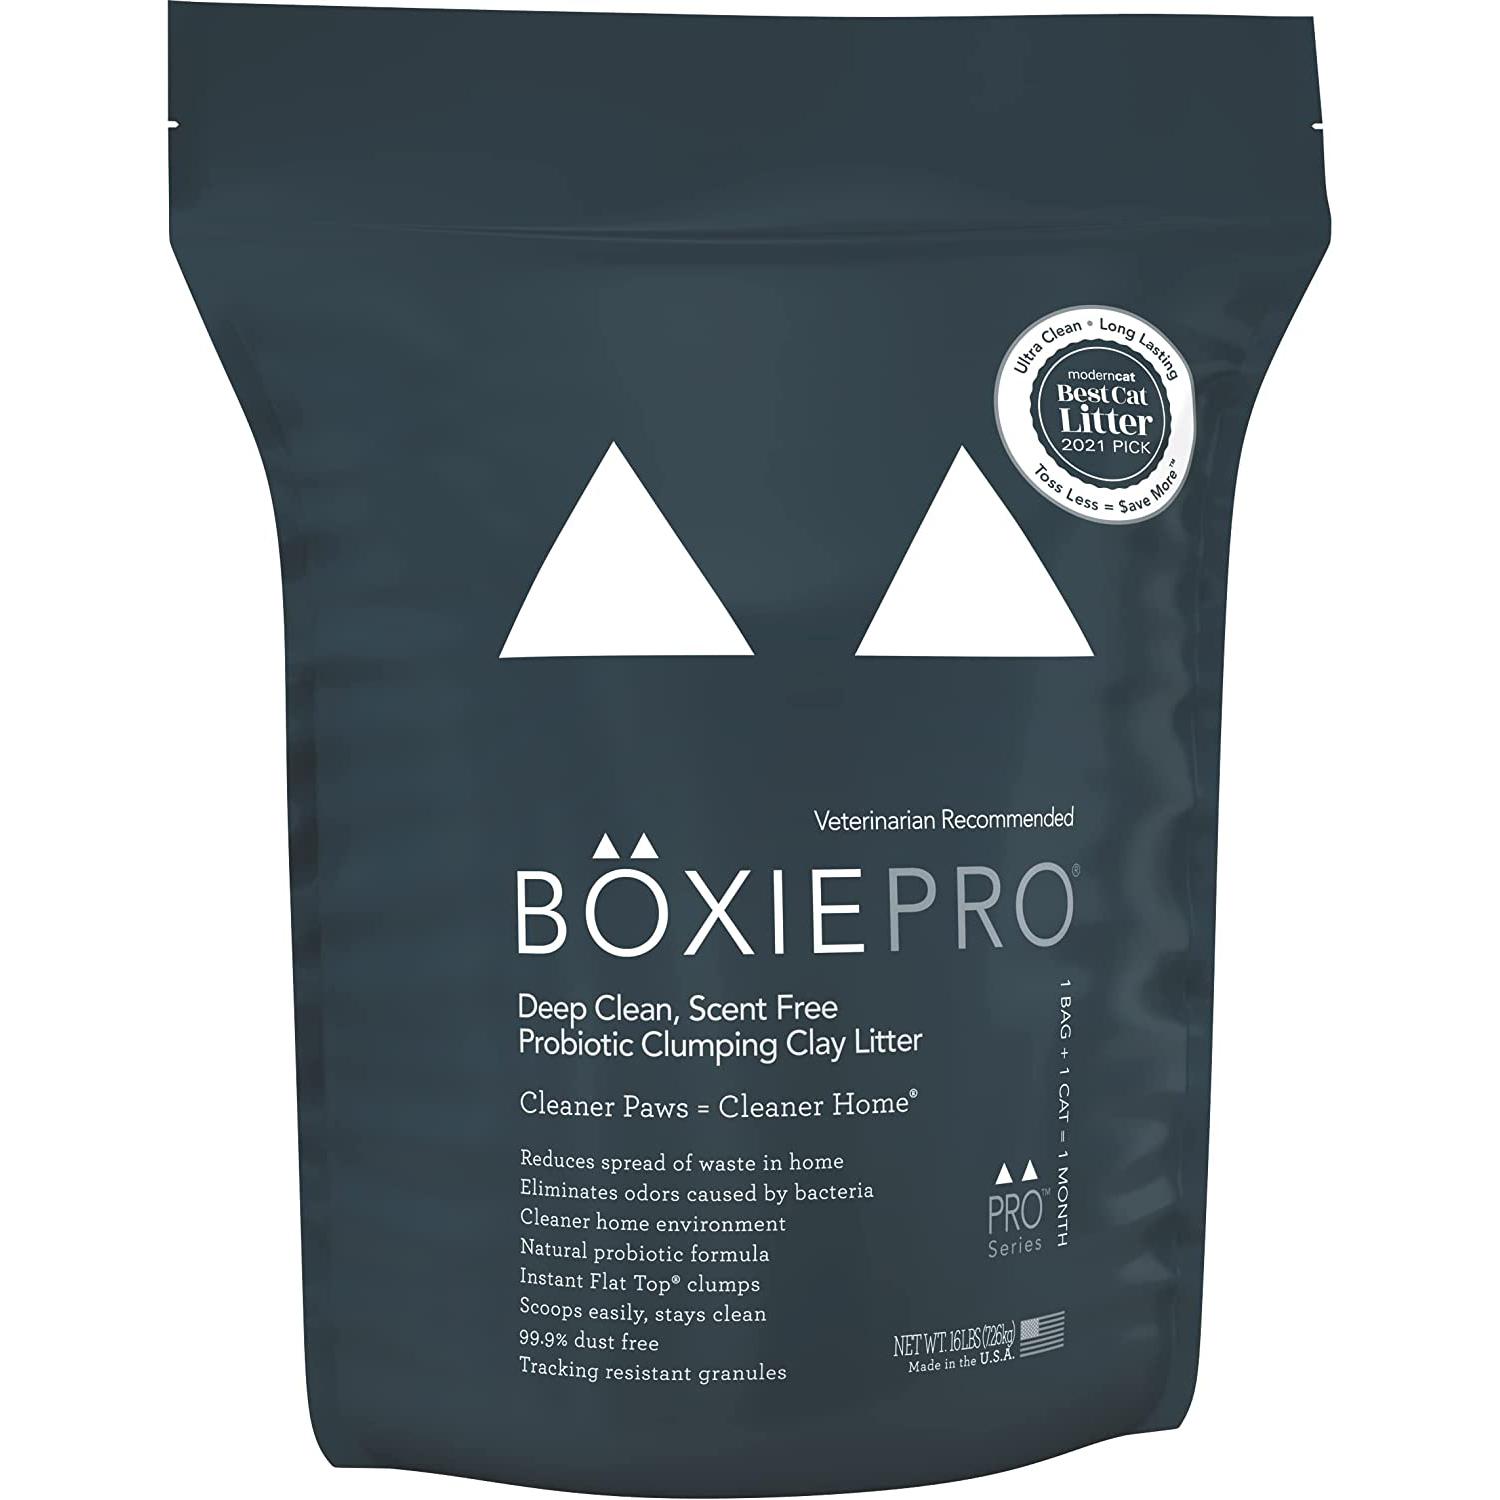 BoxiePro Deep Clean Clumping Cat Litter for $9.99 Shipped